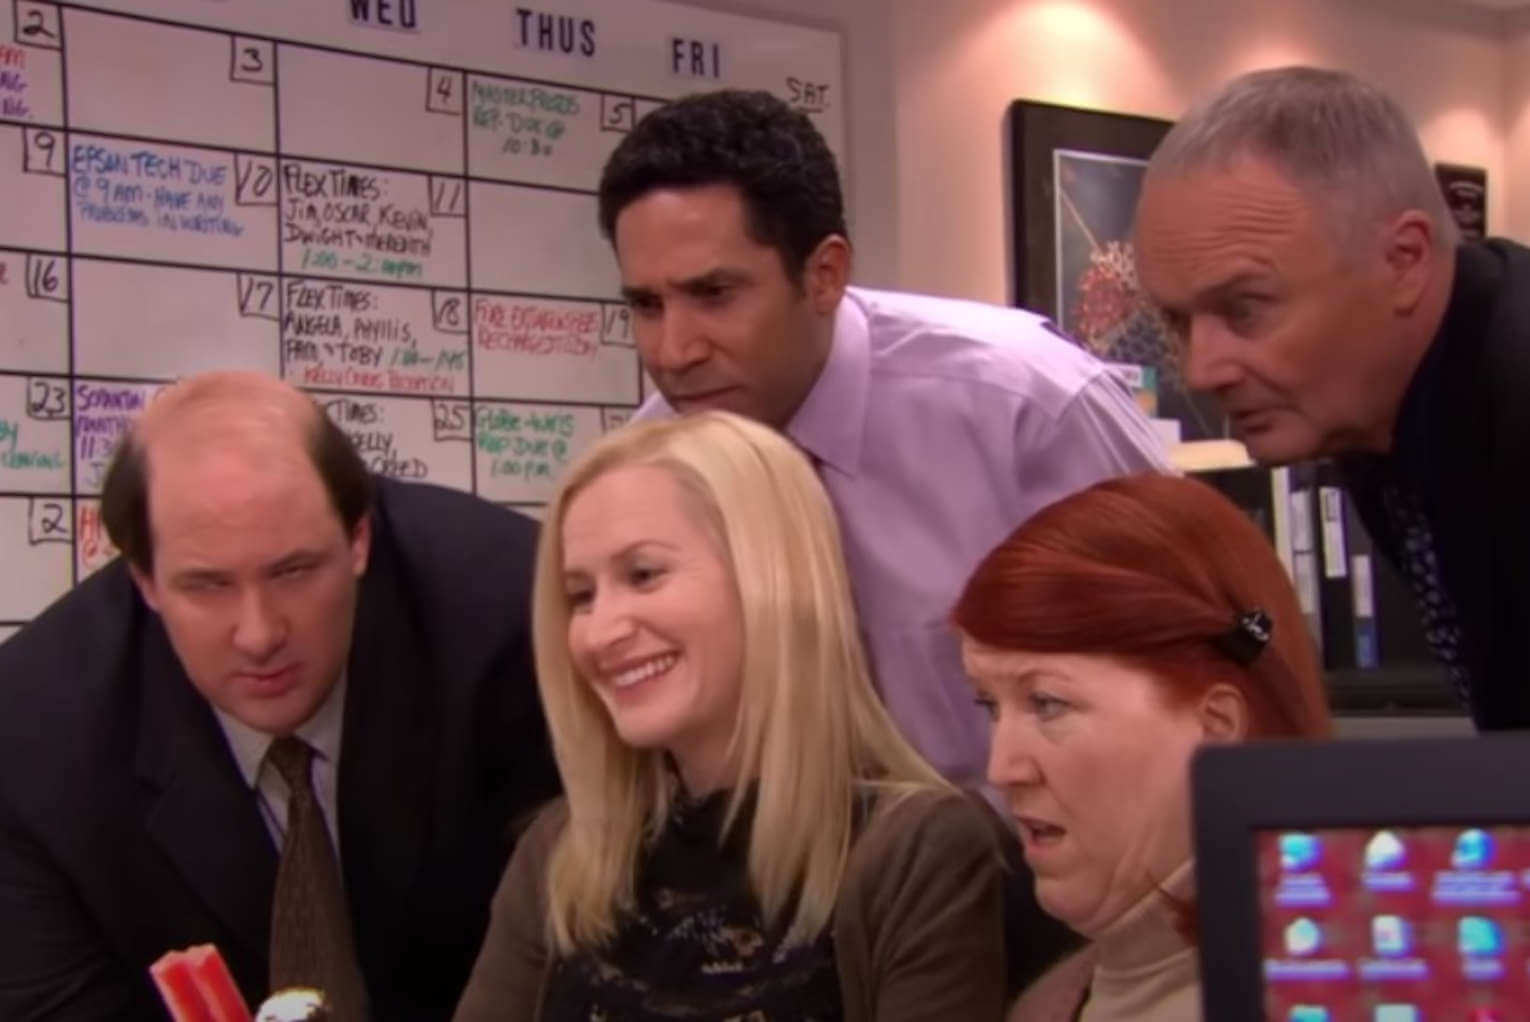 ‘The Office’ Star Angela Recounts Issue With Christian Joke